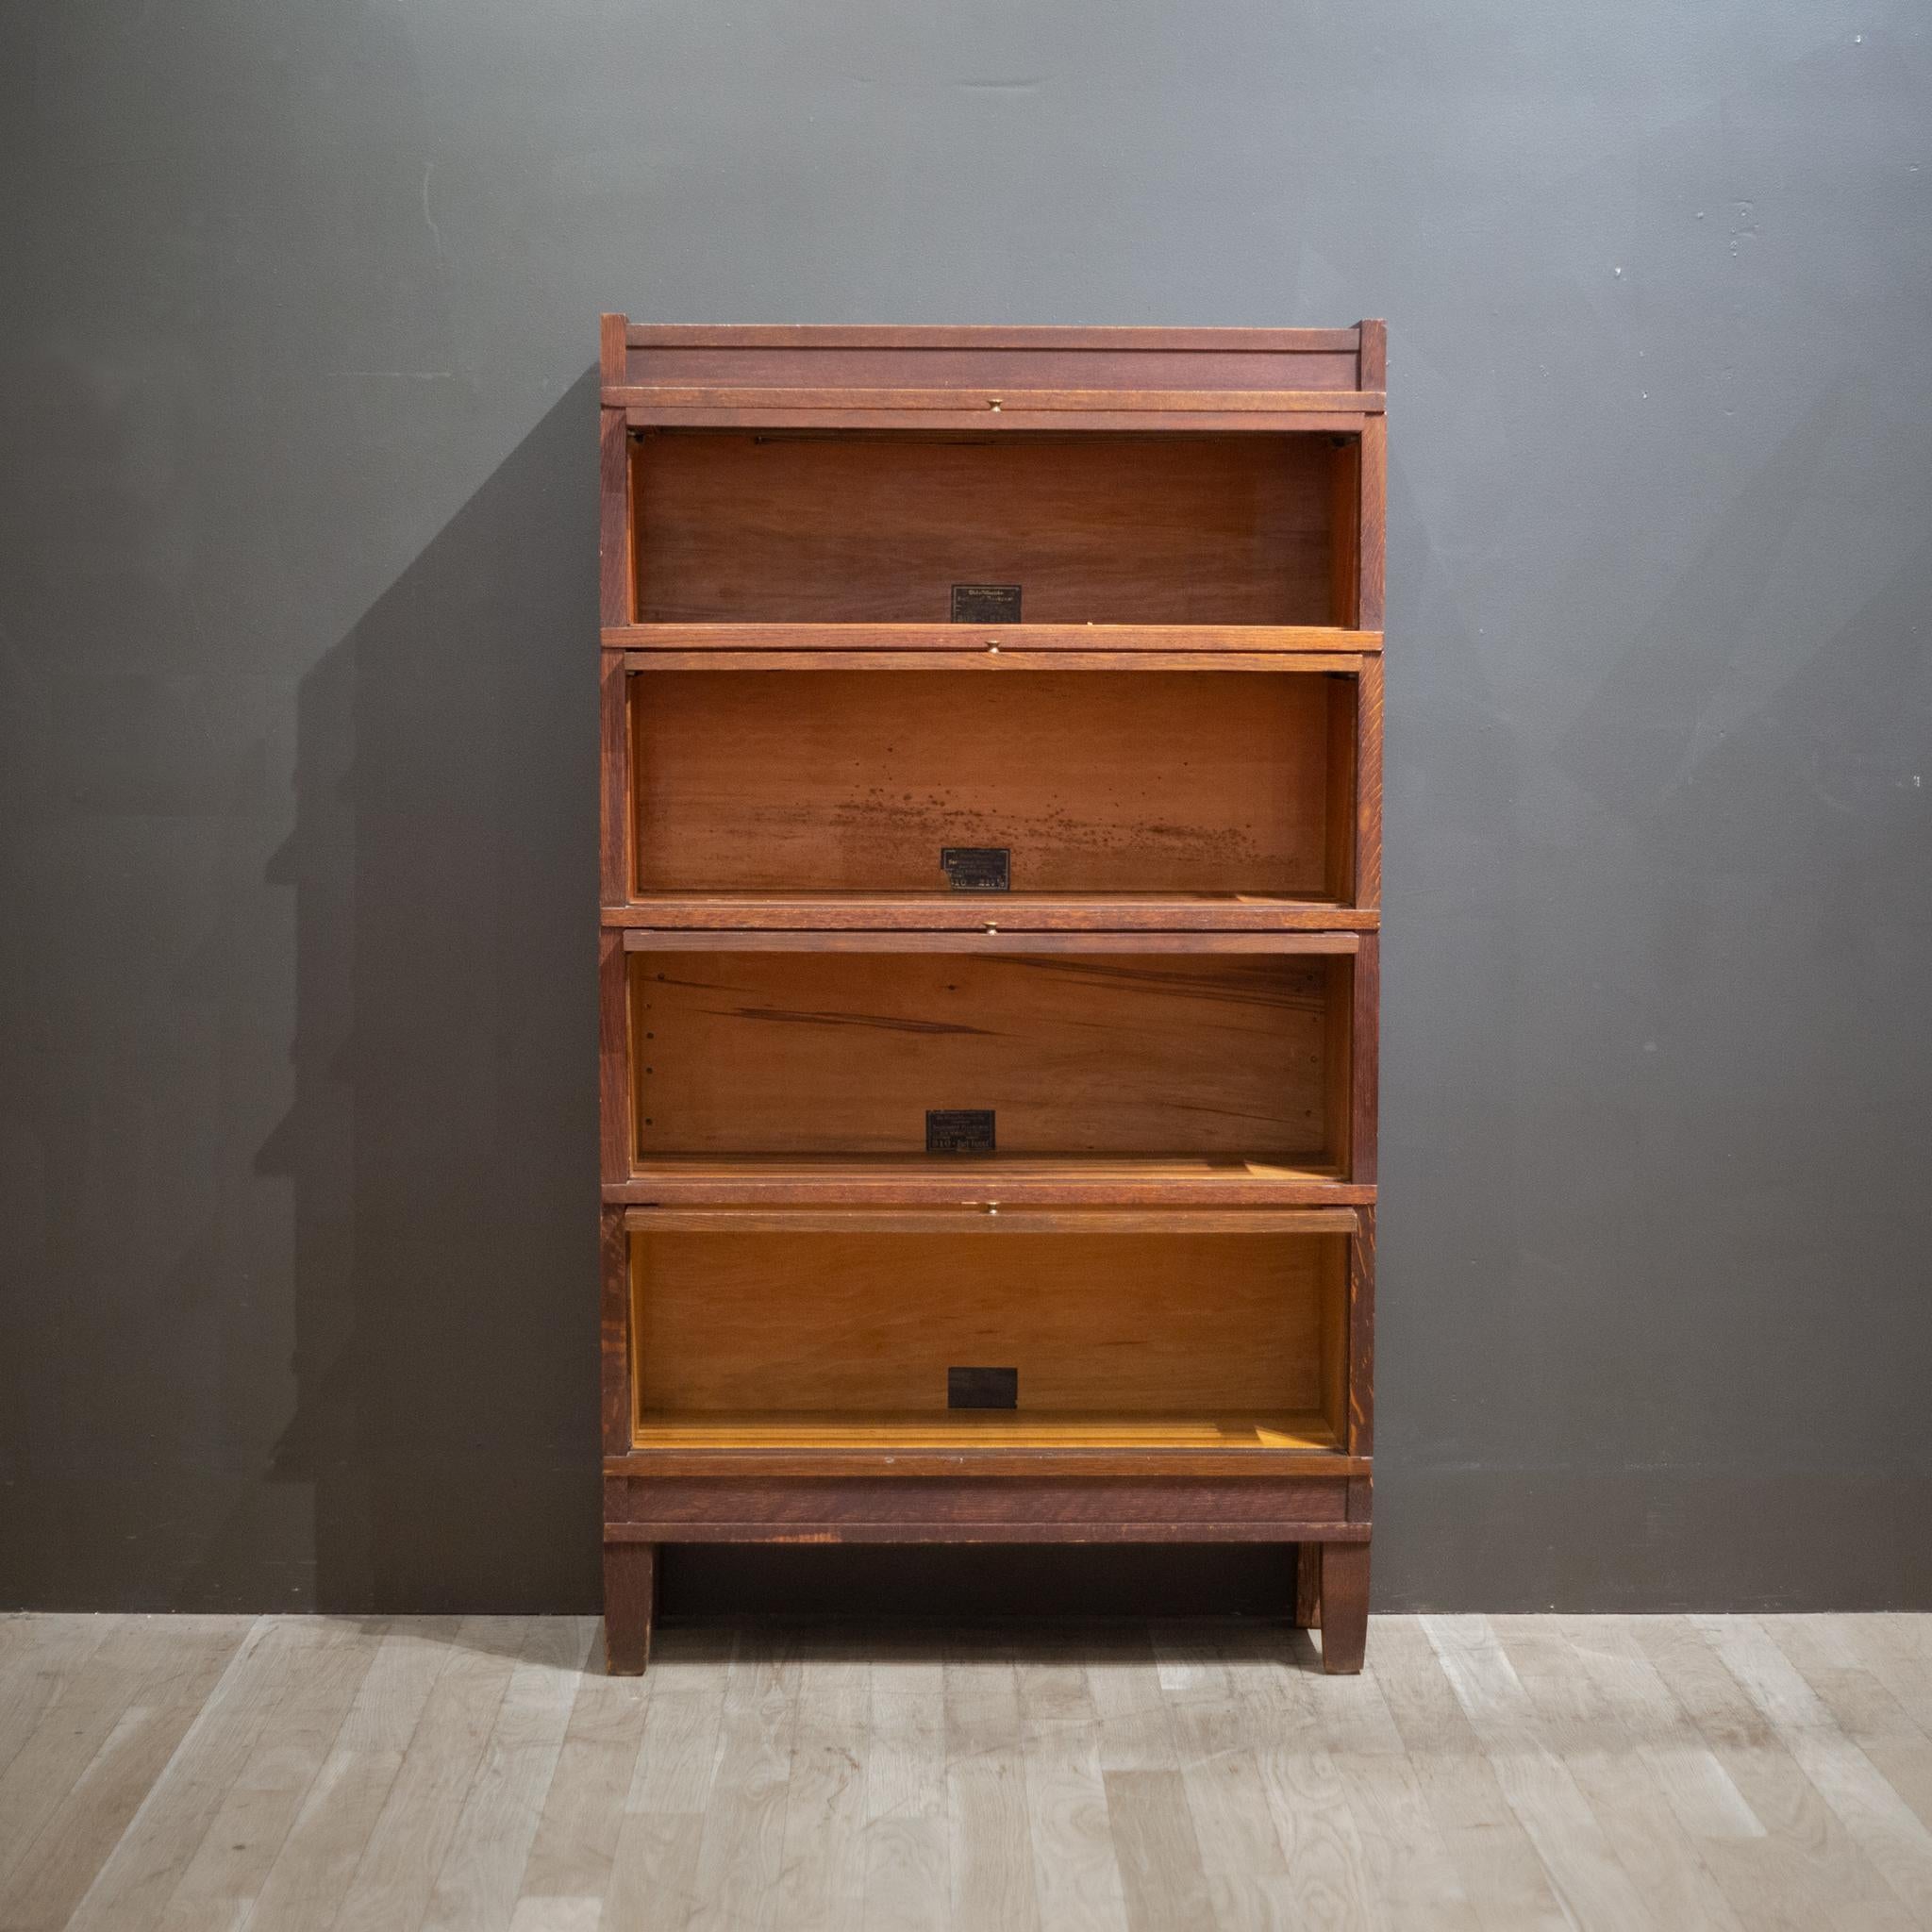 20th Century Early 20th C. Globe-Wernicke 4 Stack Lawyer's Bookcase, c.1910-1920